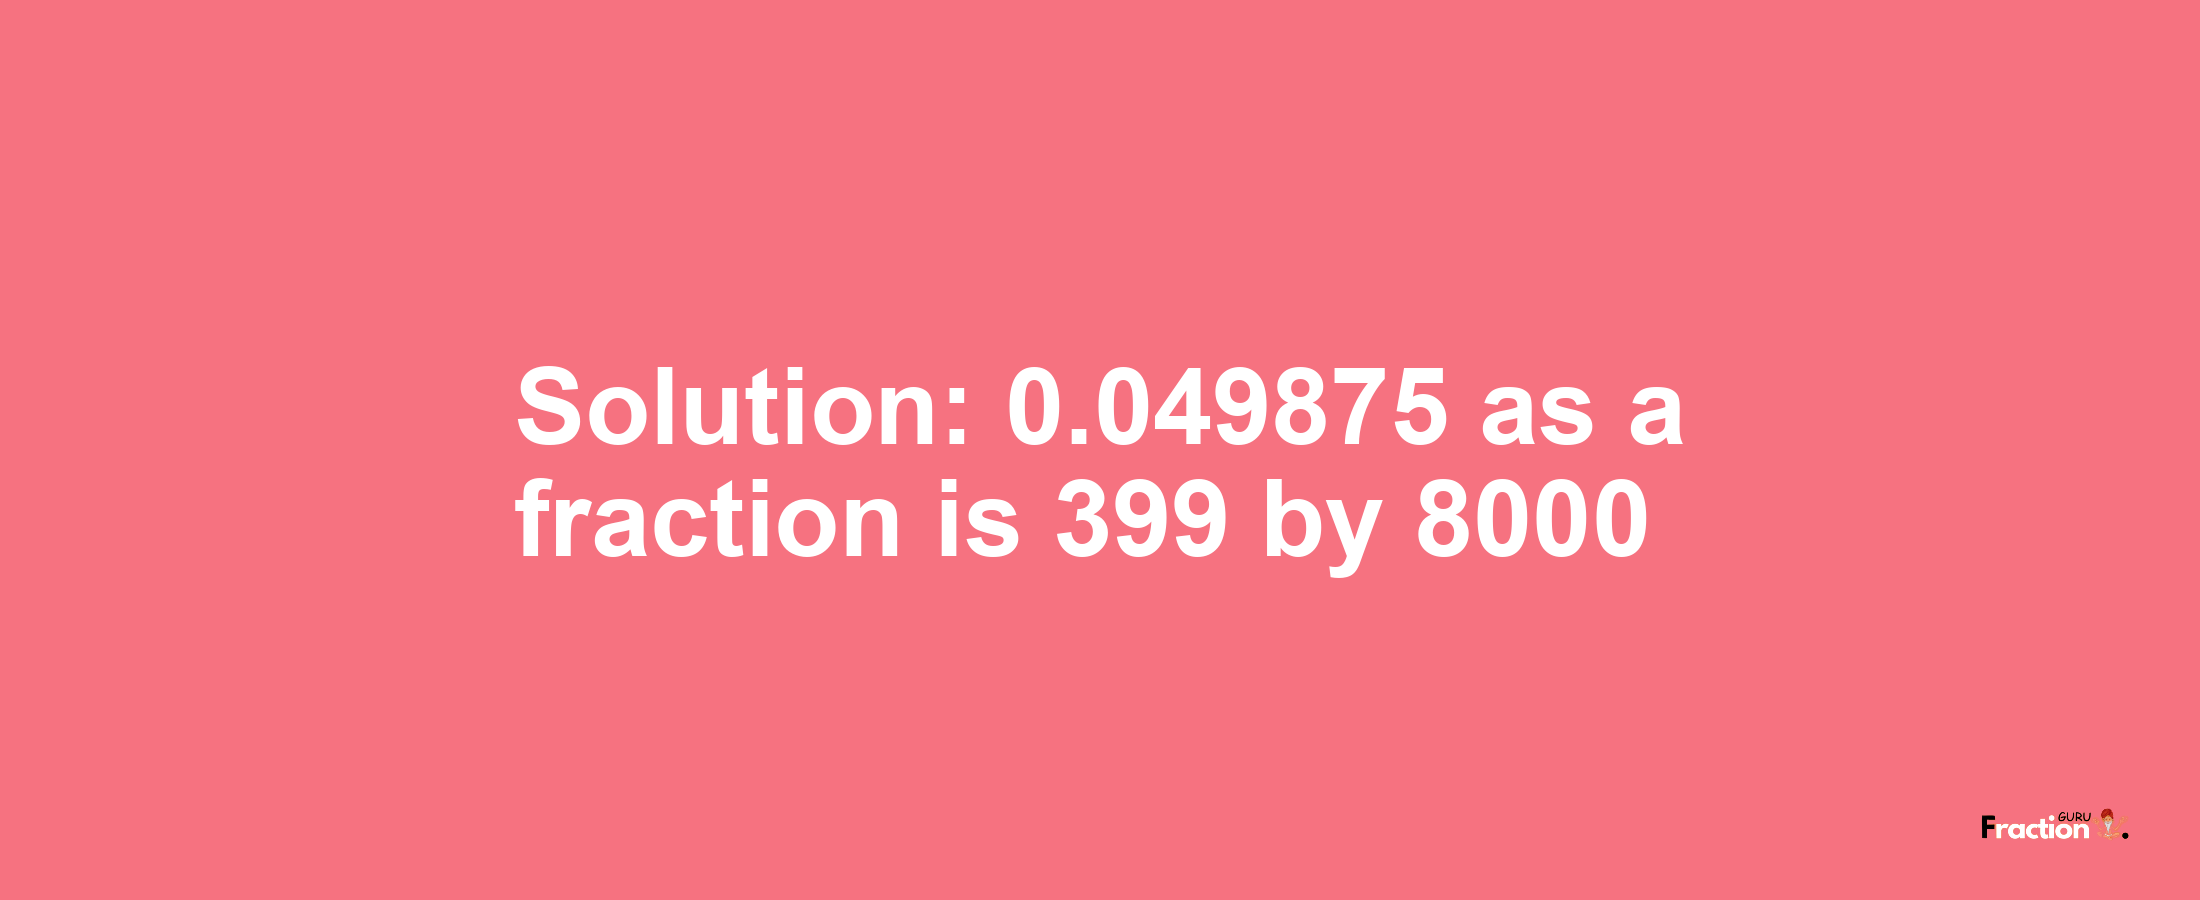 Solution:0.049875 as a fraction is 399/8000